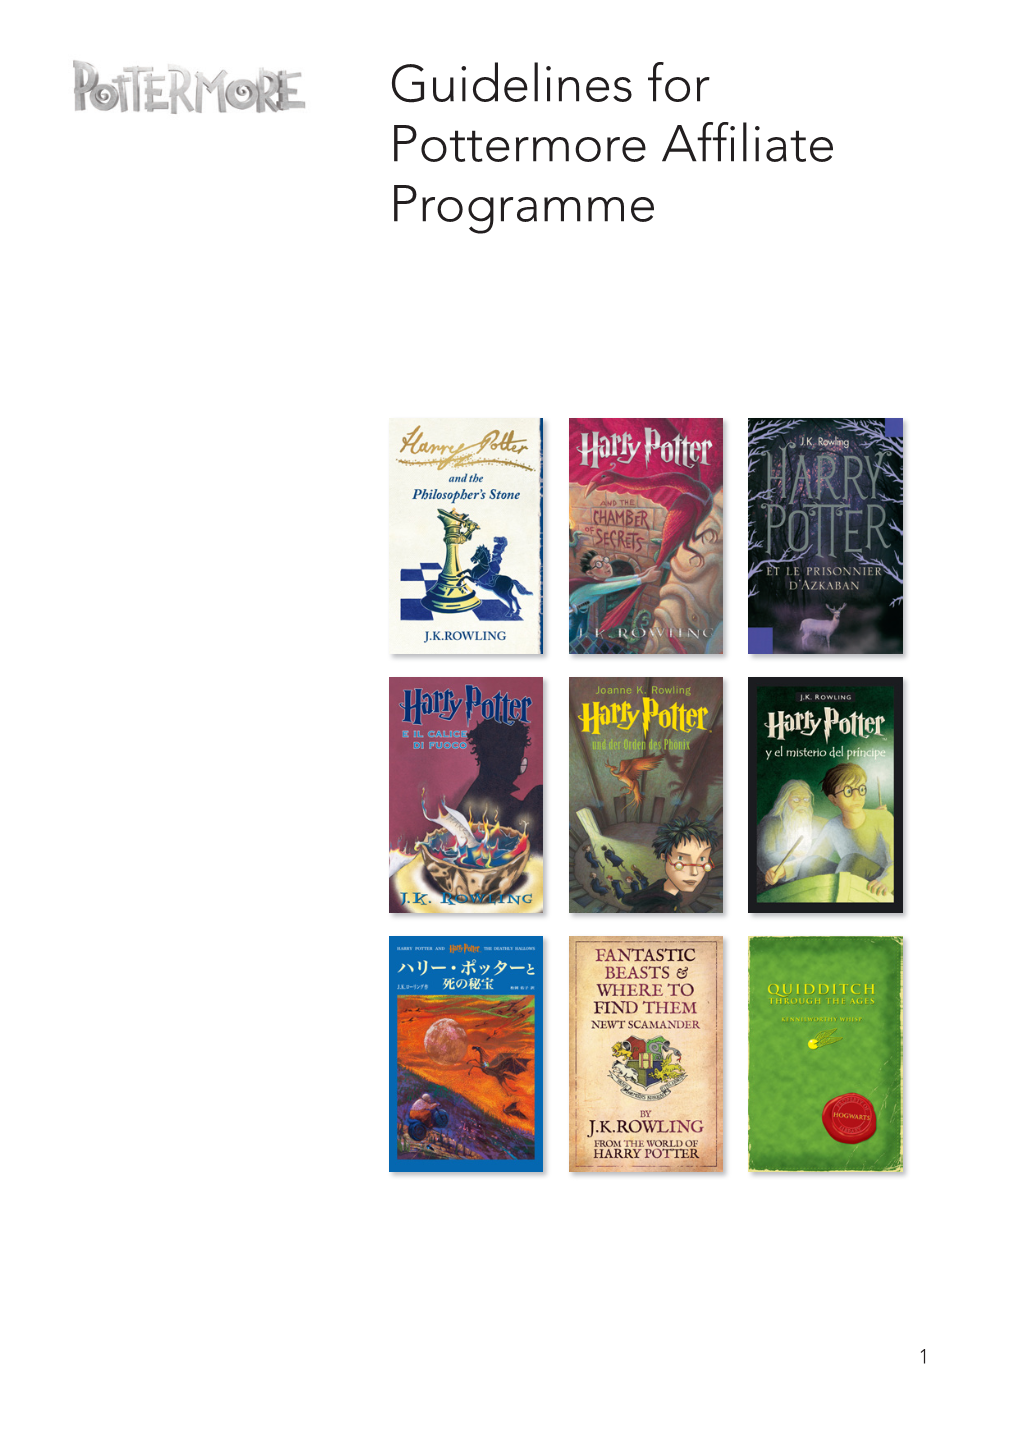 Guidelines for Pottermore Affiliate Programme